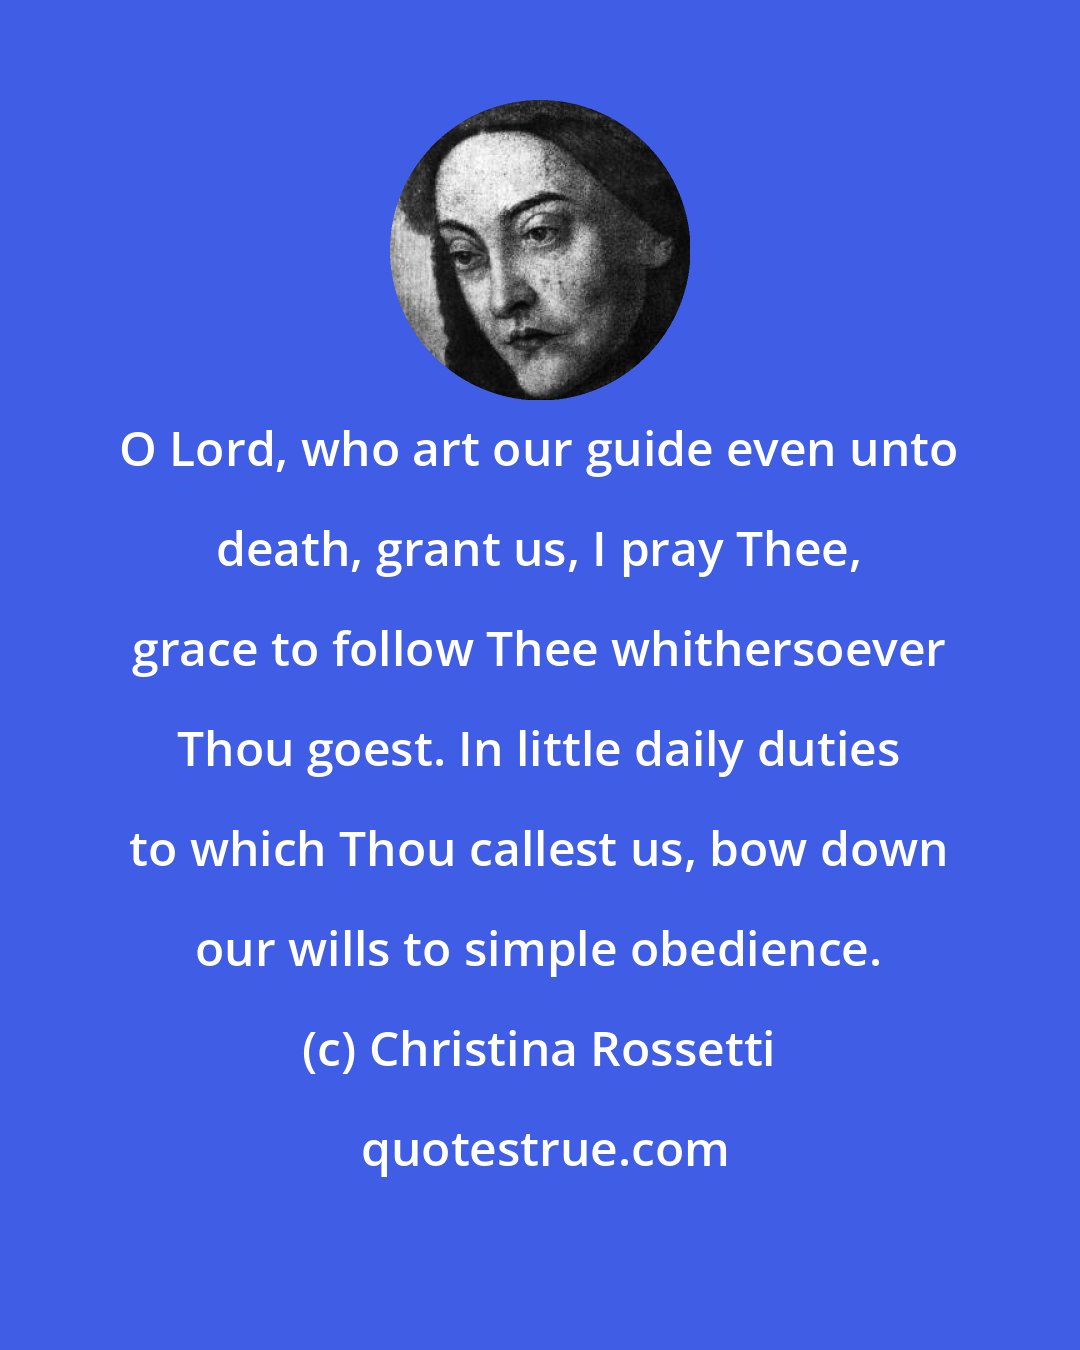 Christina Rossetti: O Lord, who art our guide even unto death, grant us, I pray Thee, grace to follow Thee whithersoever Thou goest. In little daily duties to which Thou callest us, bow down our wills to simple obedience.